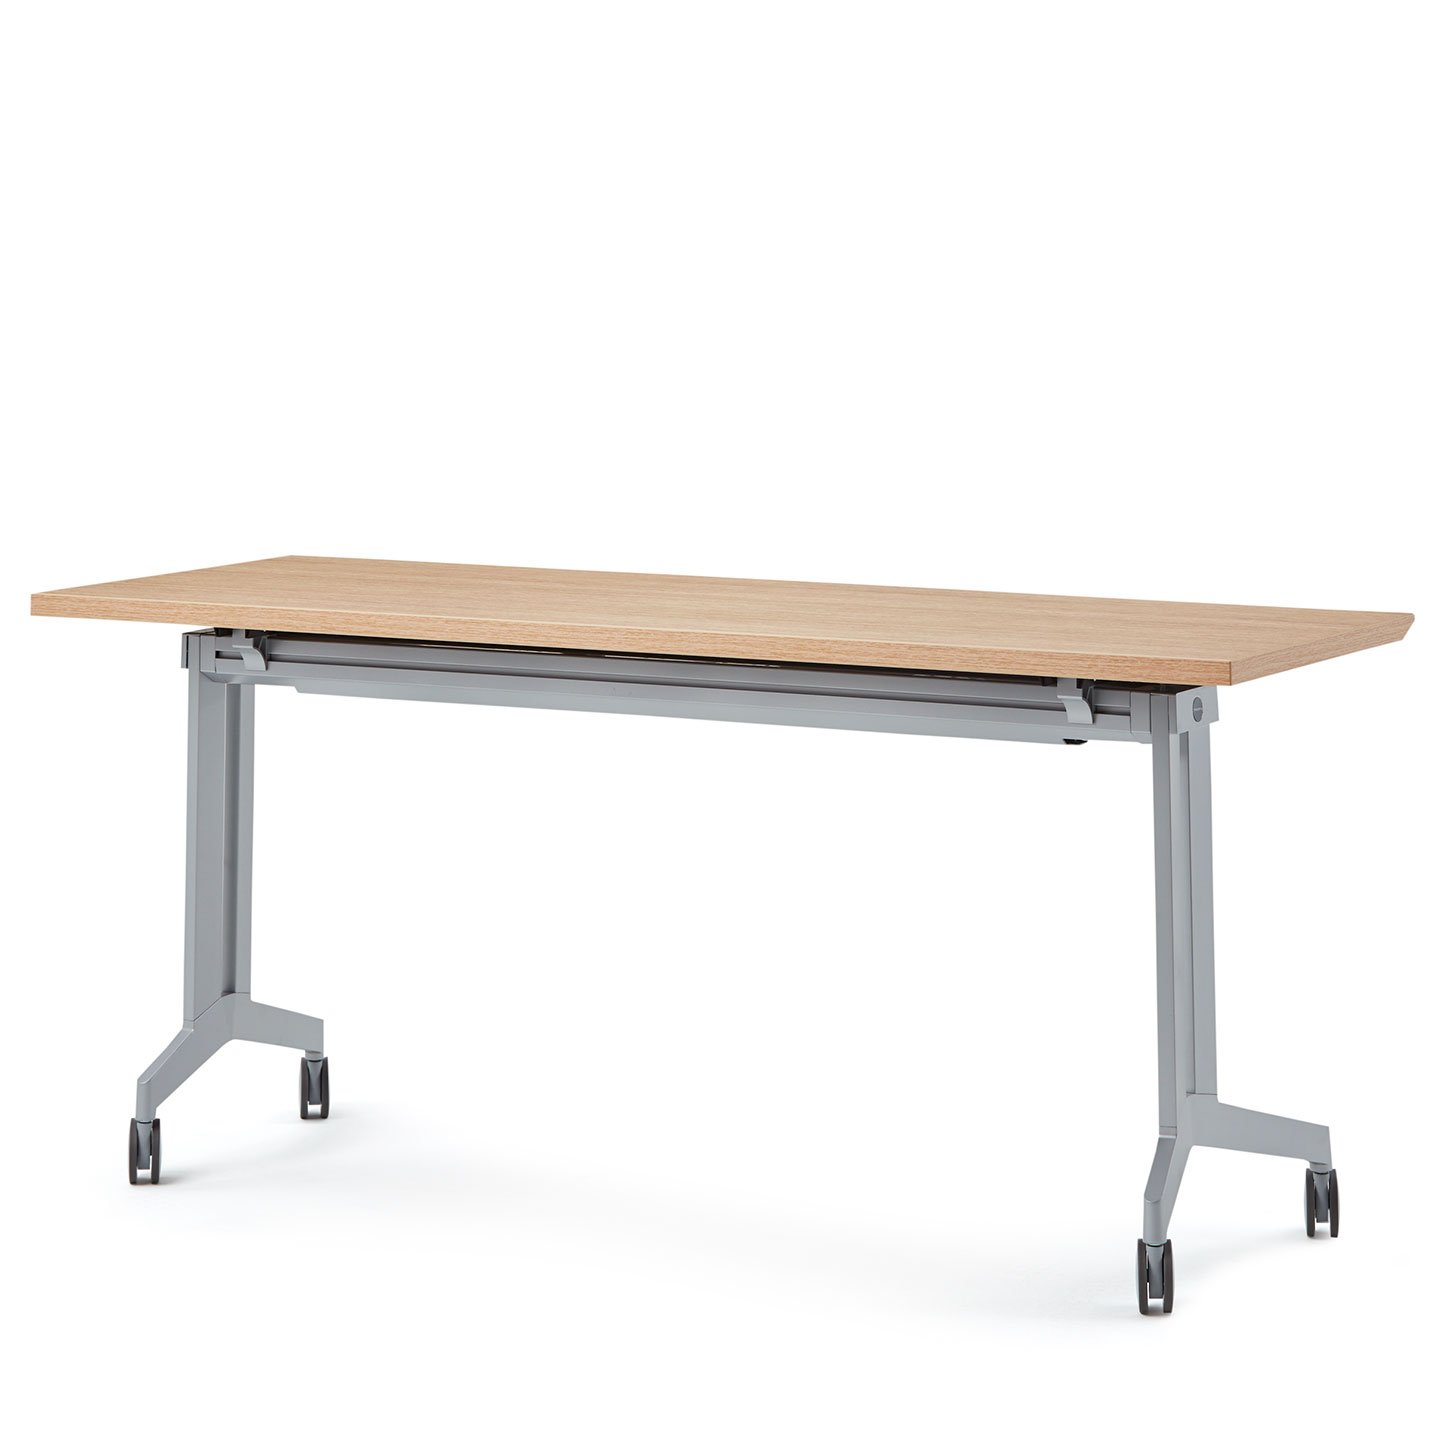 Haworth Planes Training Table with maple rectangular top and wheels on legs